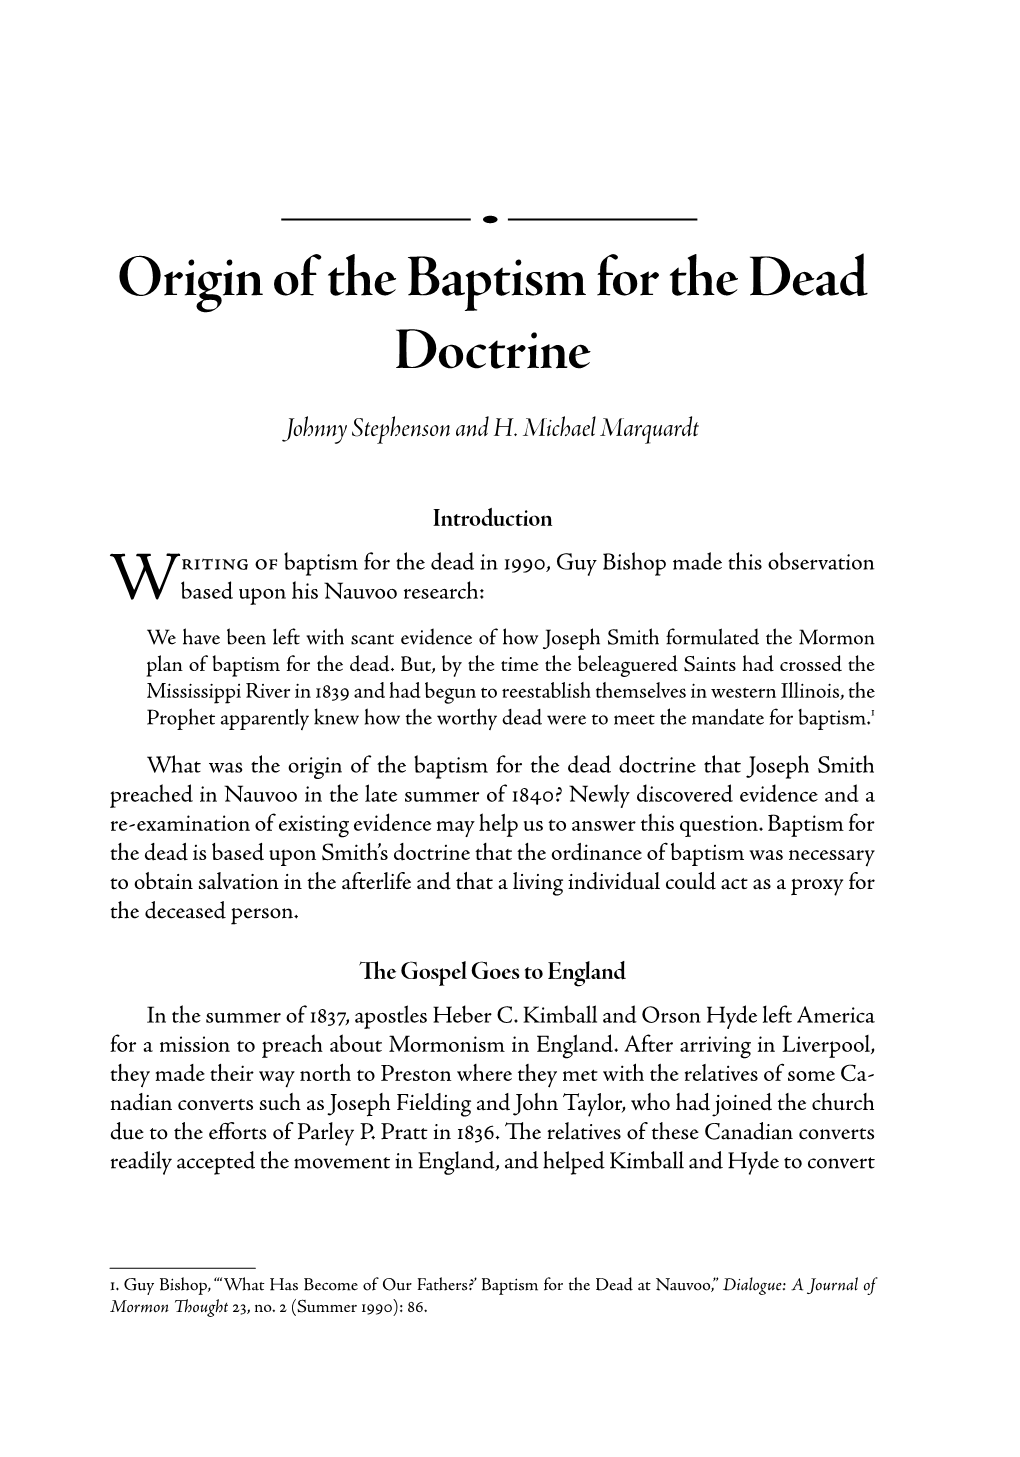 Coauthored with Johnny Stephenson, Origin of the Baptism for the Dead